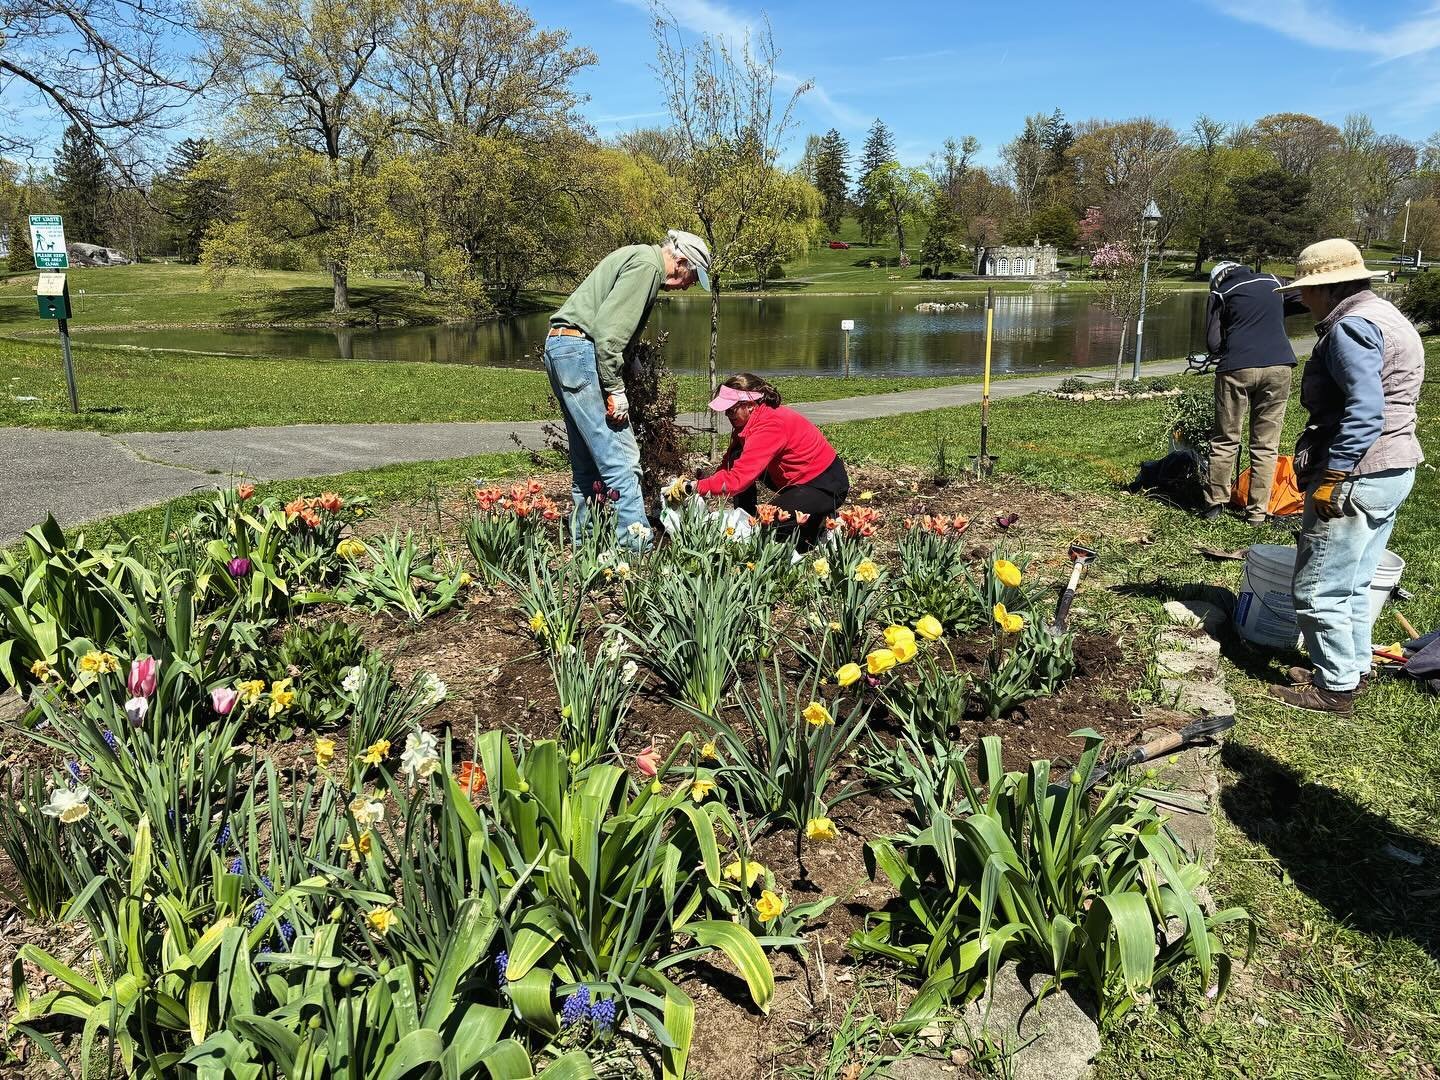 Downing Park friends transplanting flowers at corner of 9W and Third. Next week we work with students from @_nfawest to refresh the gardens along Third Street! #newburghfreeacademy